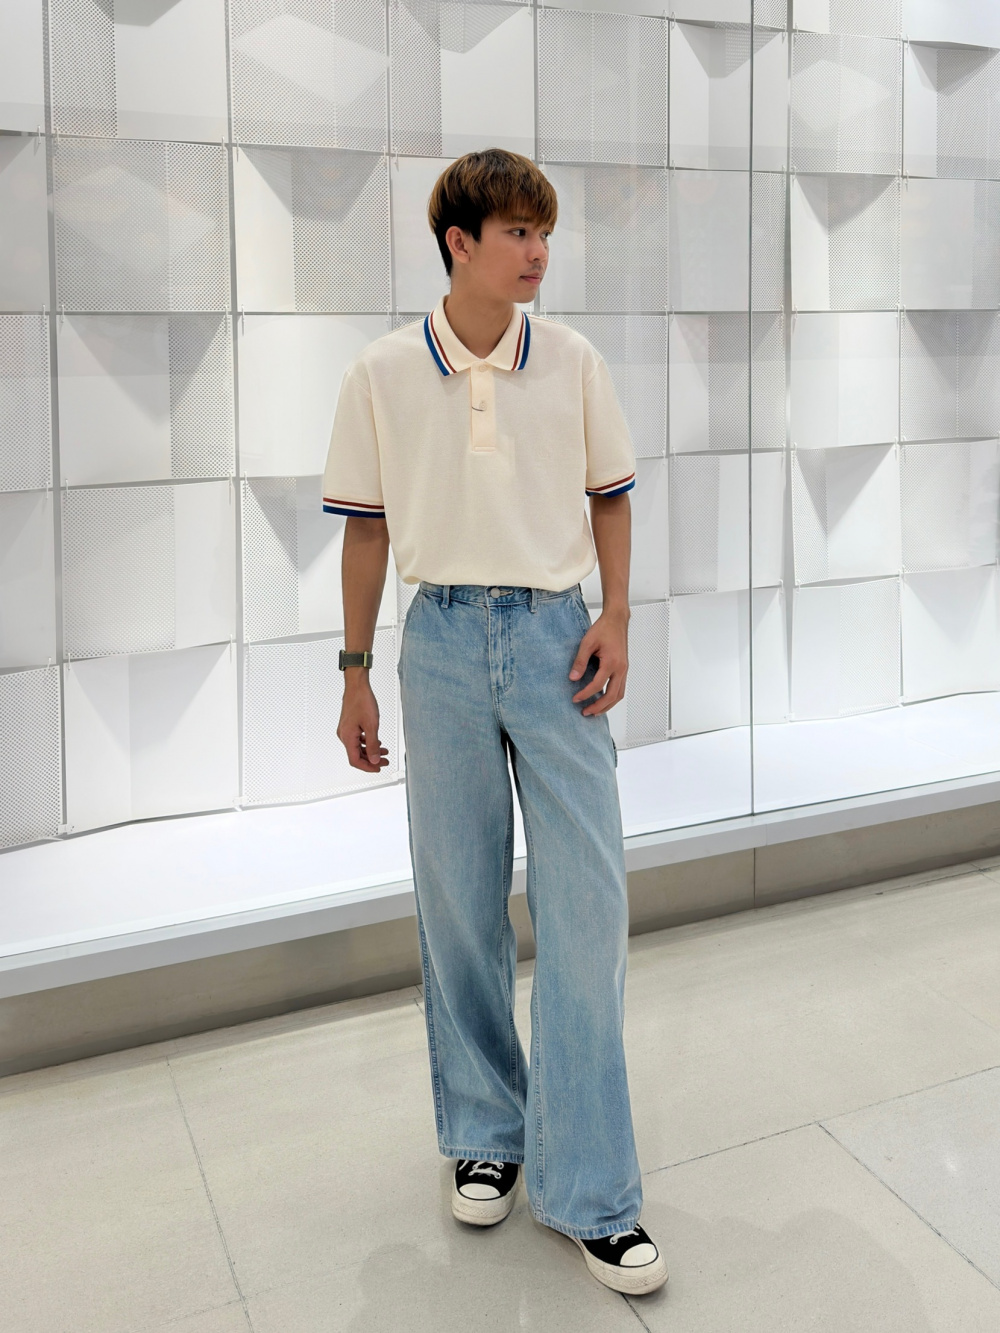 Check styling ideas for「Relax Painter Pants JW Anderson」